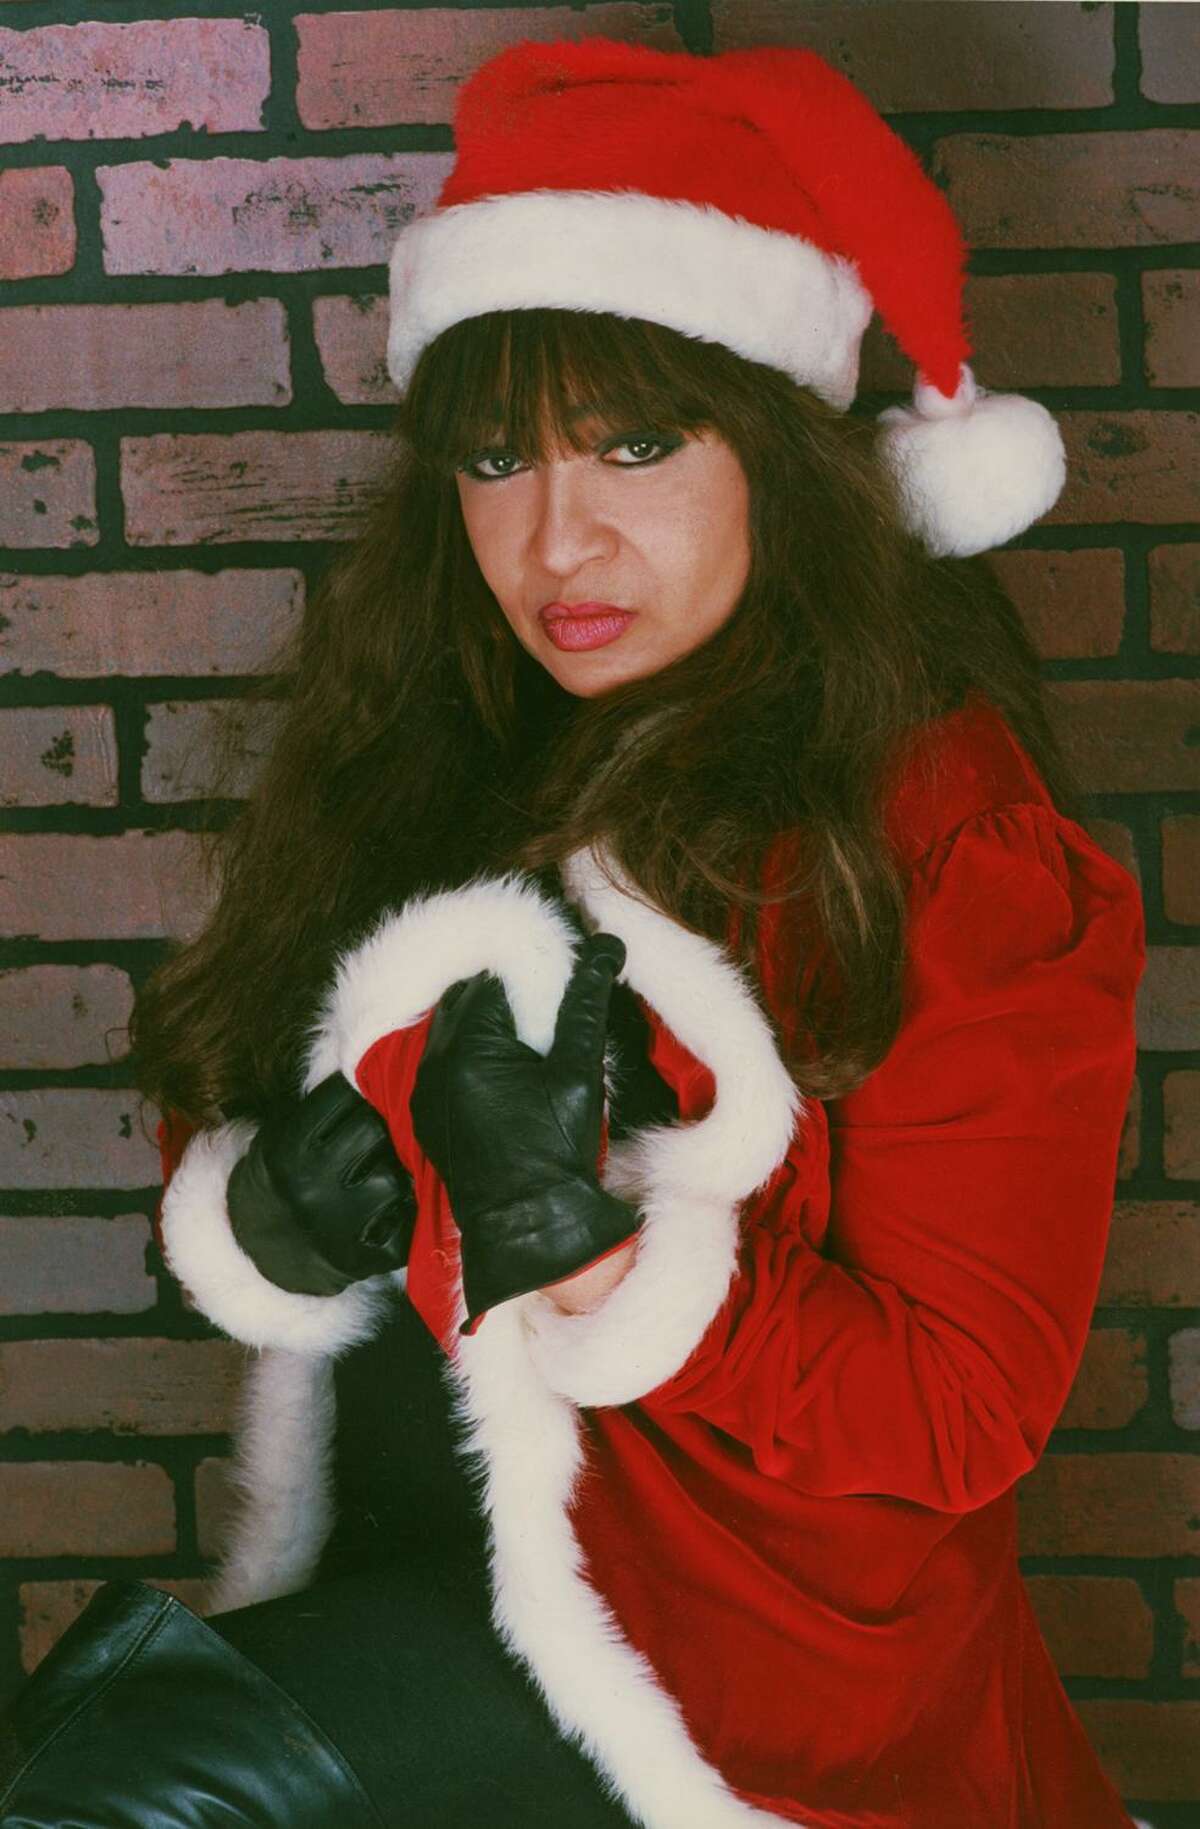 Ronnie Spector’s performs her “Best Christmas Party Ever” at Mohegan Sun on Friday, Dec. 16.